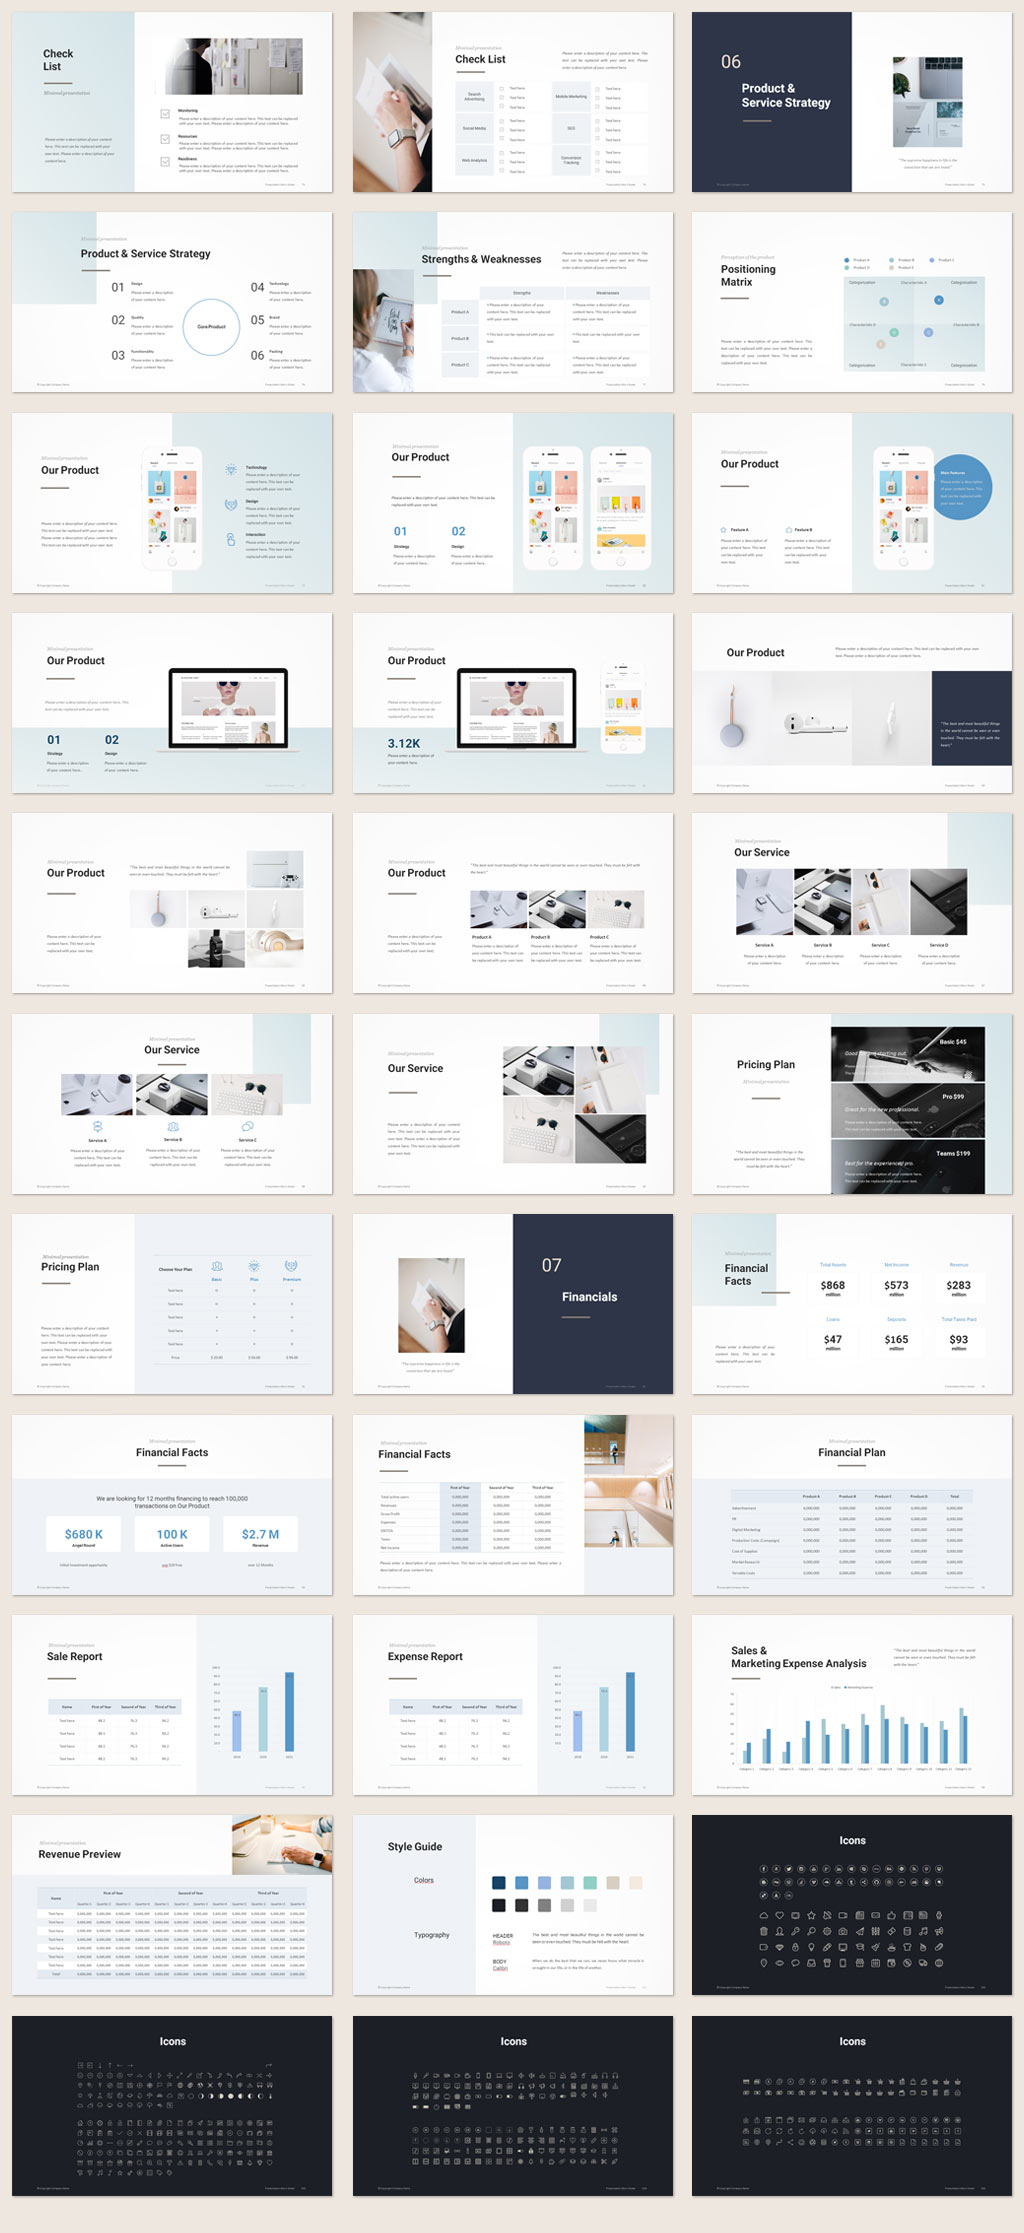 Marketing Strategy PowerPoint Template